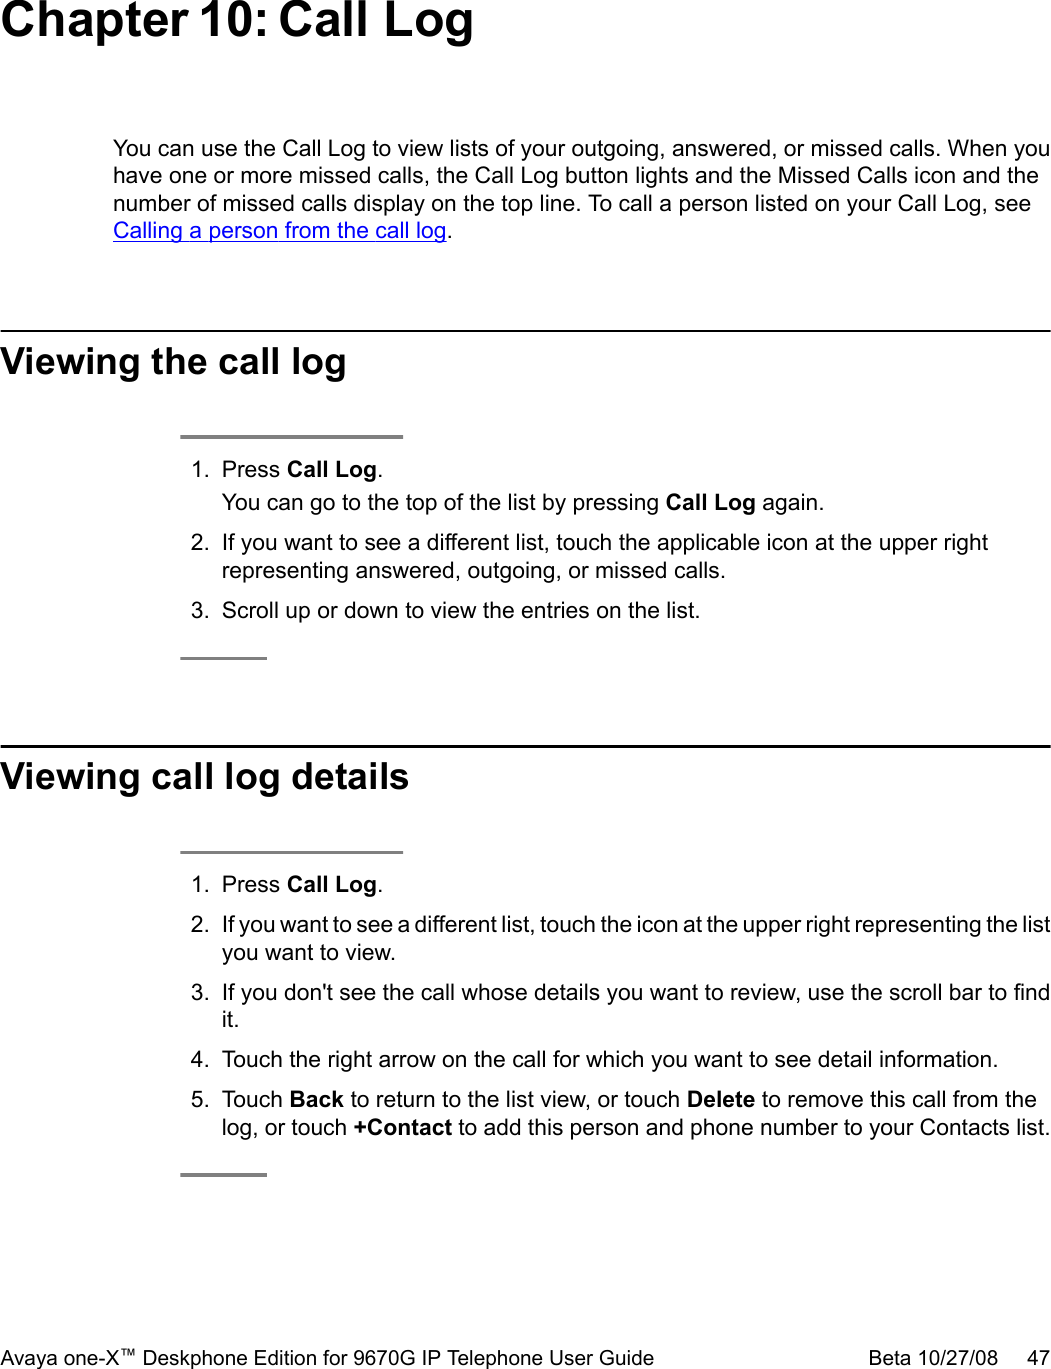 Chapter 10: Call LogYou can use the Call Log to view lists of your outgoing, answered, or missed calls. When youhave one or more missed calls, the Call Log button lights and the Missed Calls icon and thenumber of missed calls display on the top line. To call a person listed on your Call Log, see Calling a person from the call log.Viewing the call log1. Press Call Log.You can go to the top of the list by pressing Call Log again.2. If you want to see a different list, touch the applicable icon at the upper rightrepresenting answered, outgoing, or missed calls.3. Scroll up or down to view the entries on the list.Viewing call log details1. Press Call Log.2. If you want to see a different list, touch the icon at the upper right representing the listyou want to view.3. If you don&apos;t see the call whose details you want to review, use the scroll bar to findit.4. Touch the right arrow on the call for which you want to see detail information.5. Touch Back to return to the list view, or touch Delete to remove this call from thelog, or touch +Contact to add this person and phone number to your Contacts list.Avaya one-X™ Deskphone Edition for 9670G IP Telephone User Guide Beta 10/27/08     47